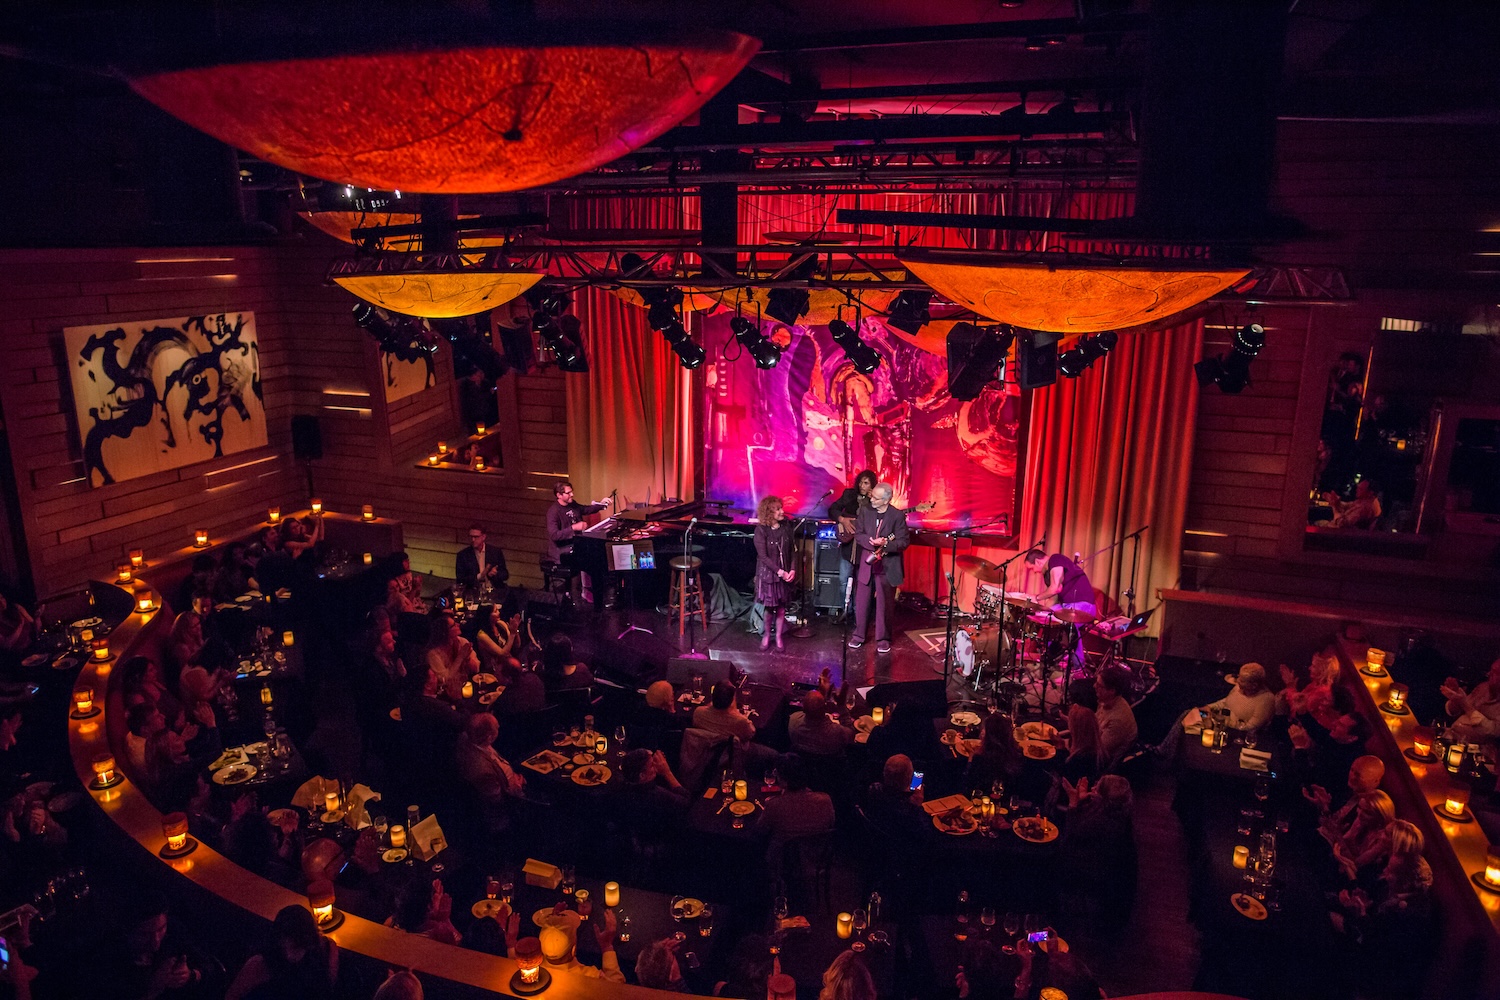 jazz group performing on stage, people sitting watching, red curtains, lights on stage, candles on tables